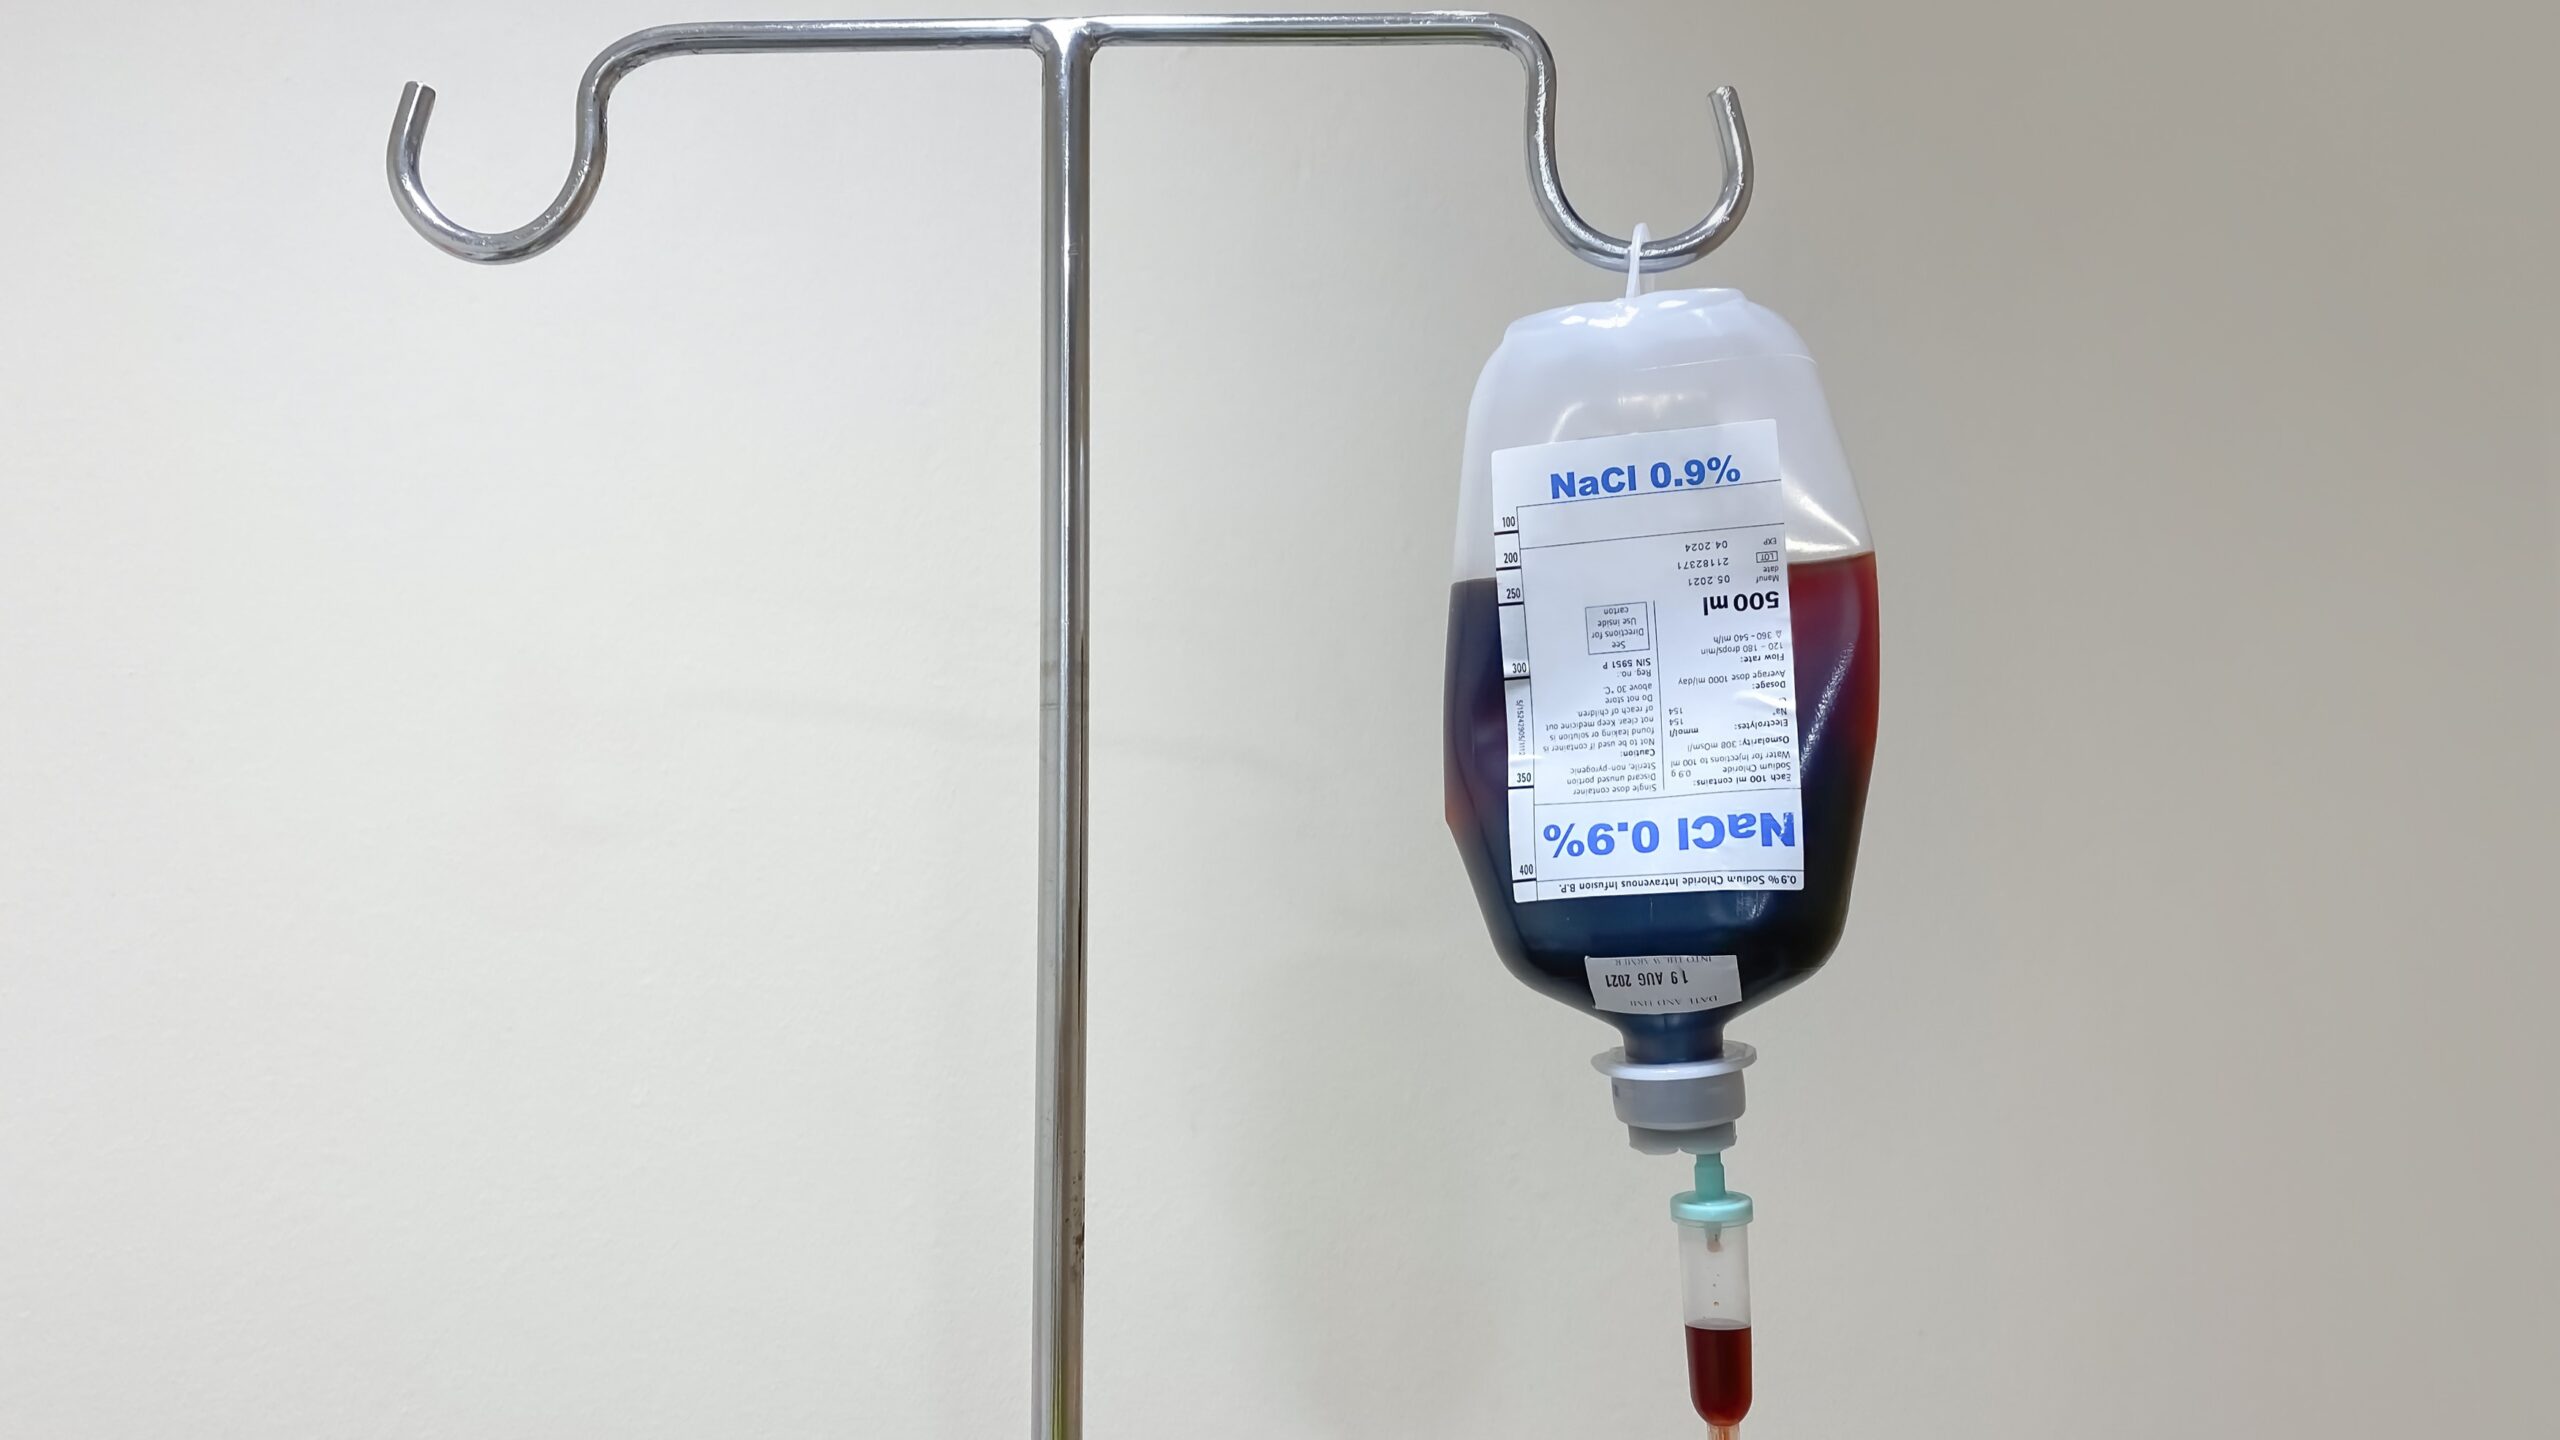 Intravenous Iron Therapy Appears Optimal in Iron Deficiency Anemia With IBD